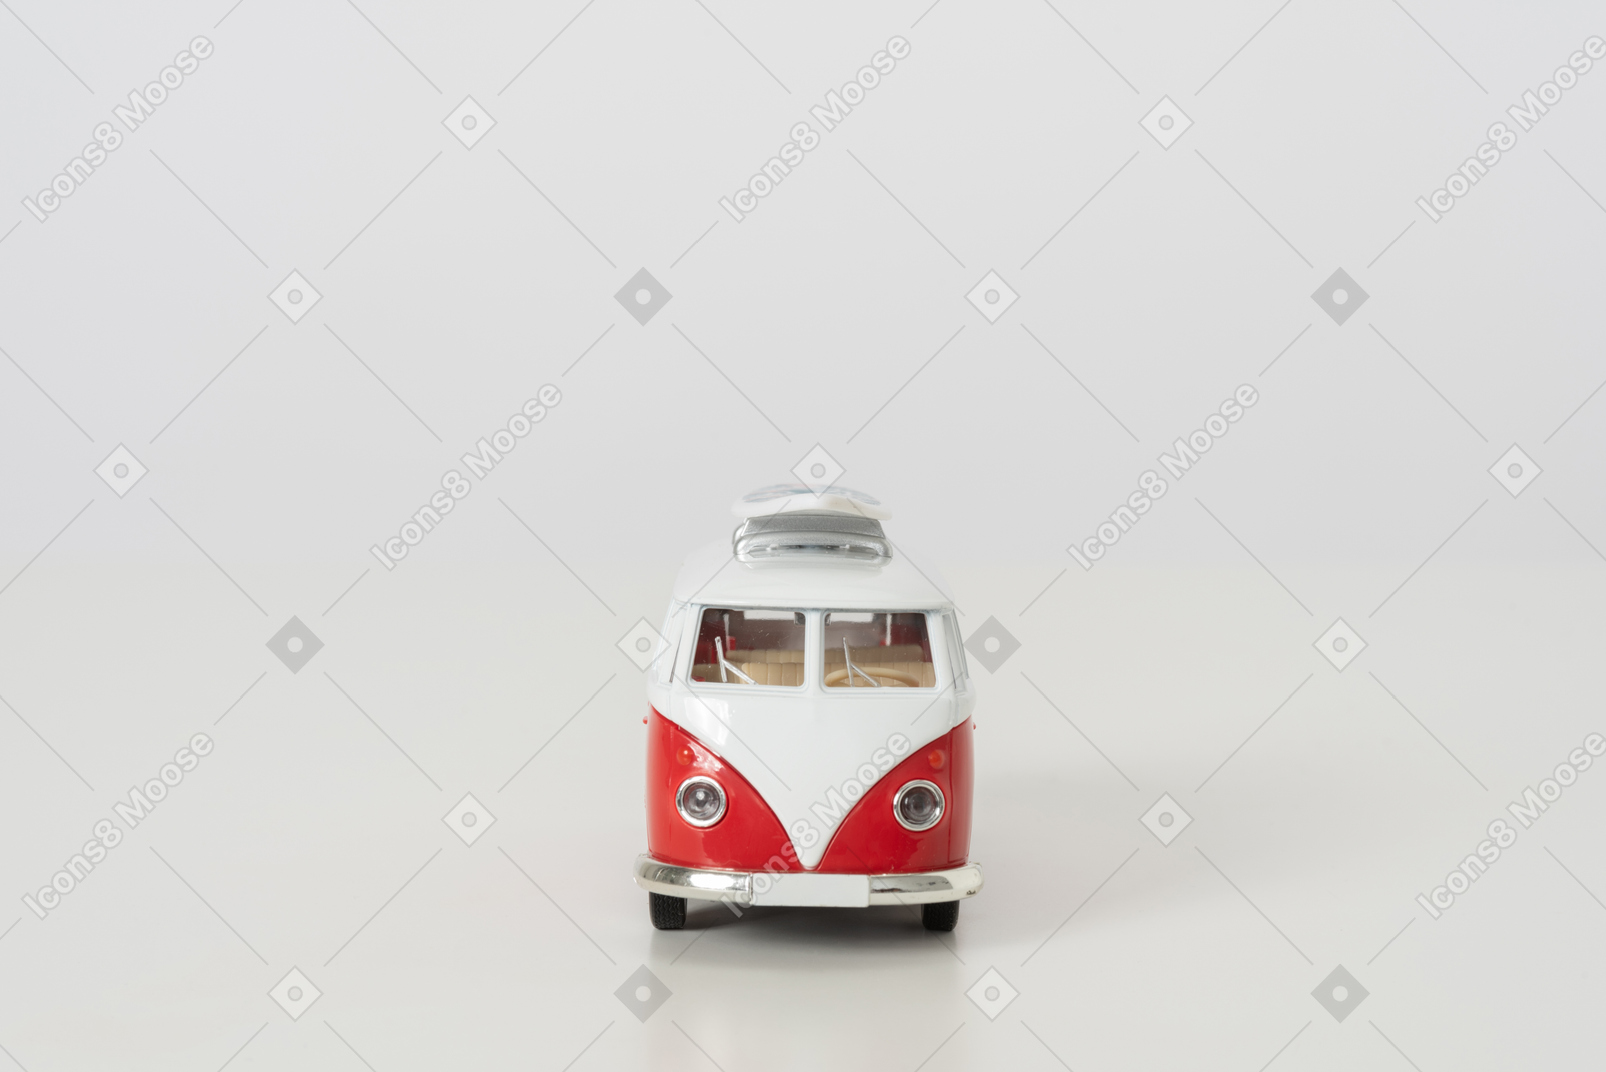 Toy hippie auto bus photographed on grey background